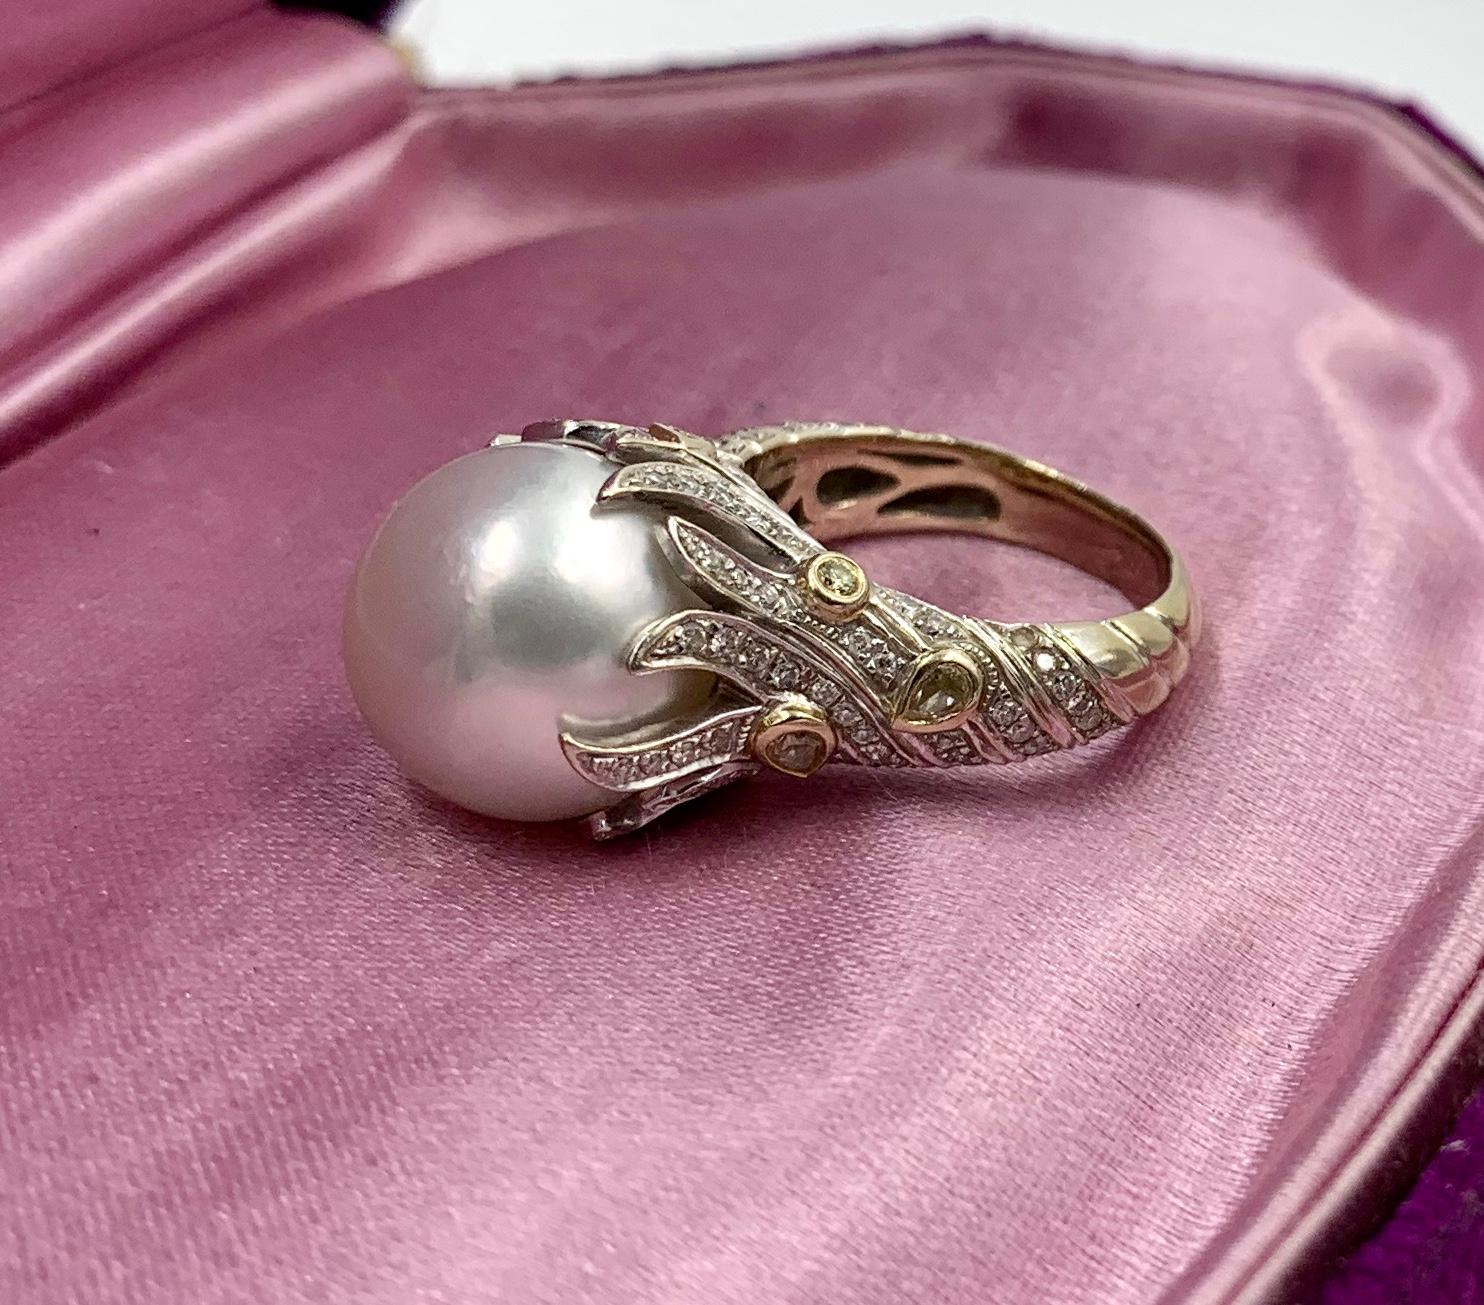 A magnificent South Sea Pearl Ring set with eight Fancy Yellow Diamonds and 122 Round Brilliant Cut Diamonds in a wonderful flame motif setting in 18 Karat Yellow and White Gold.   The extraordinary South Sea Pearl is 13.5mm in diameter.  It has a